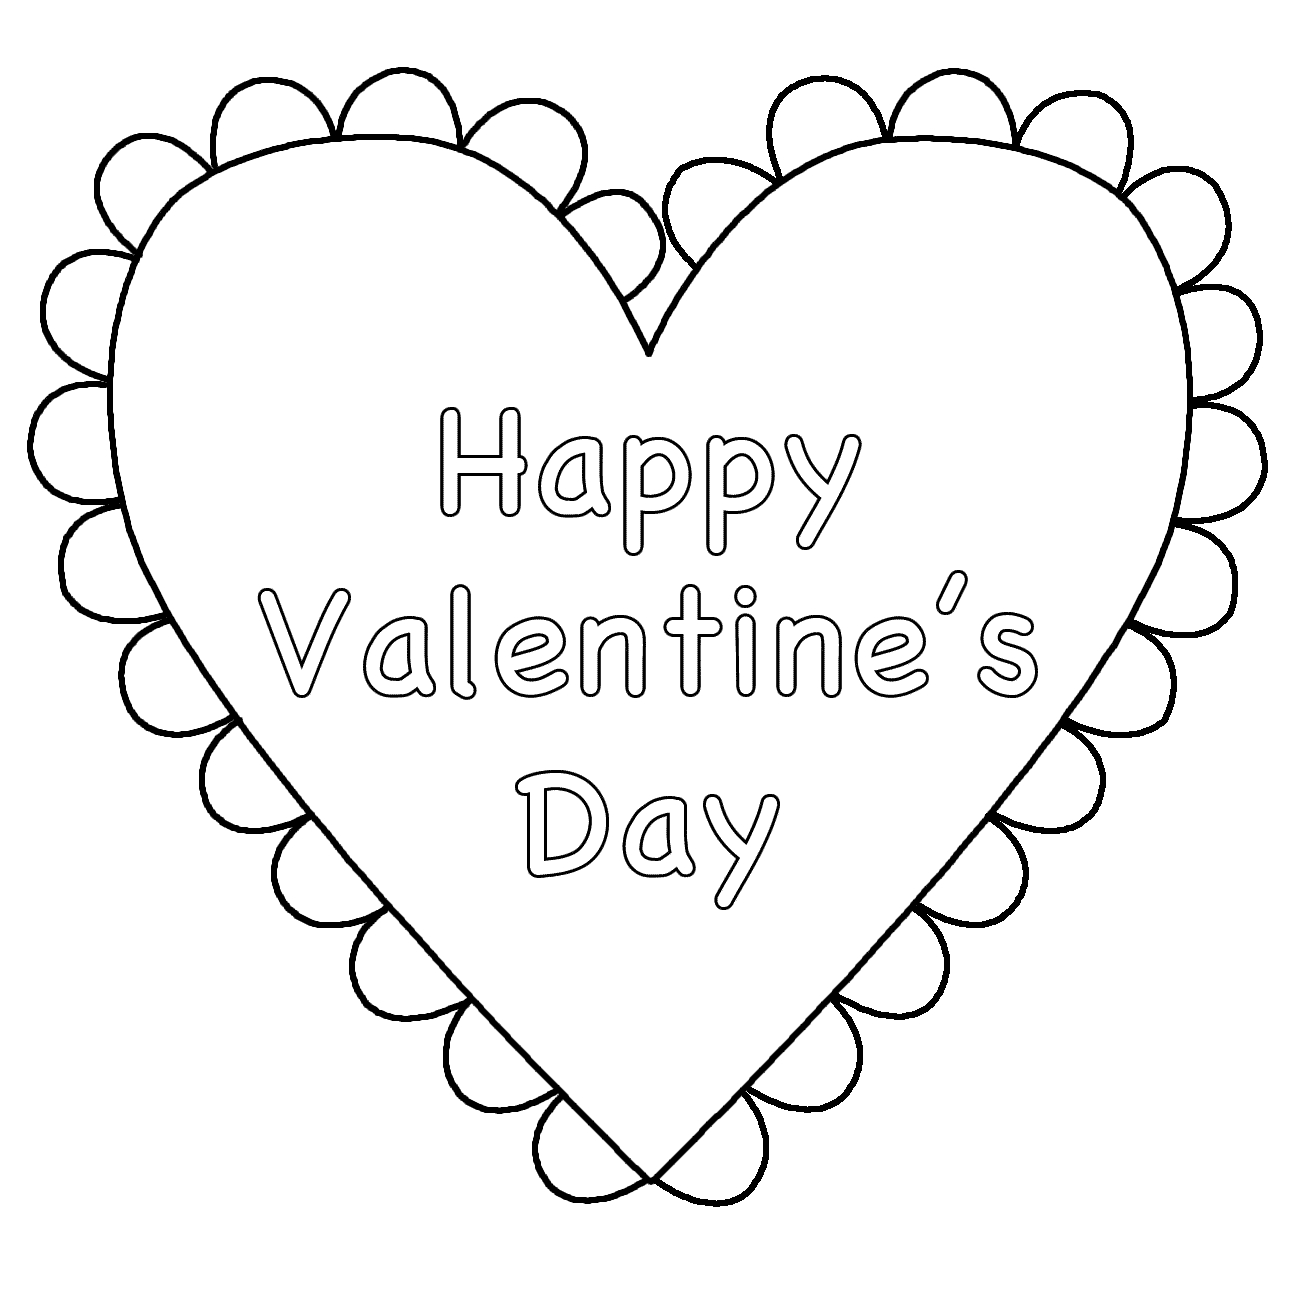 Valentines Day Hearts Coloring Pages Collection Valentines Coloring Pages For Kids Pictures